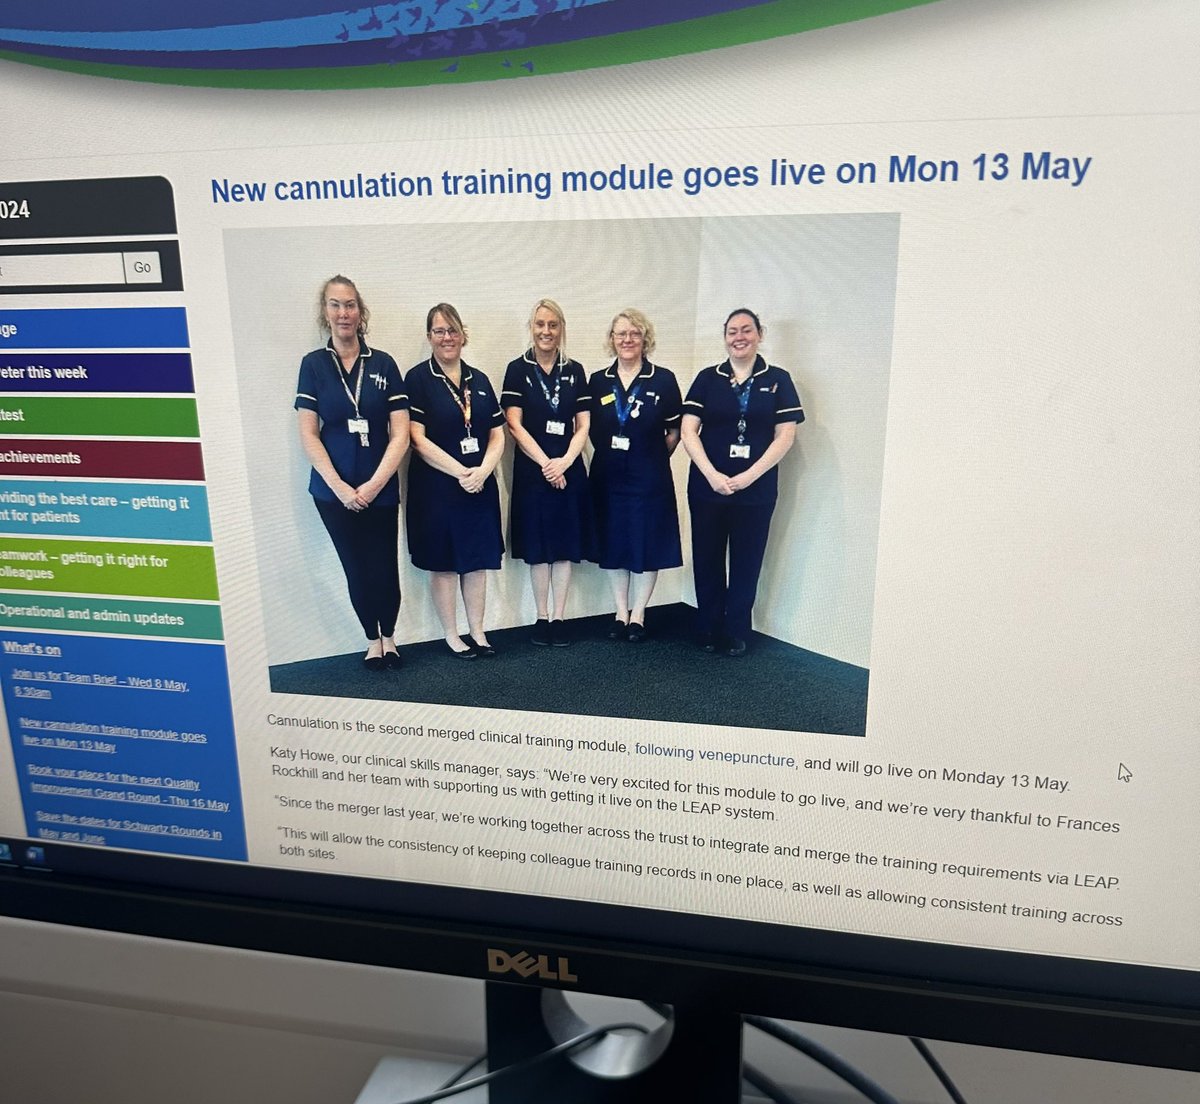 Please check out this weeks our news on merging of training. @theyrfairycakes @Piprich1 @SFTclinicalski1 @BakerKatyhaynes @PhillipsJackee